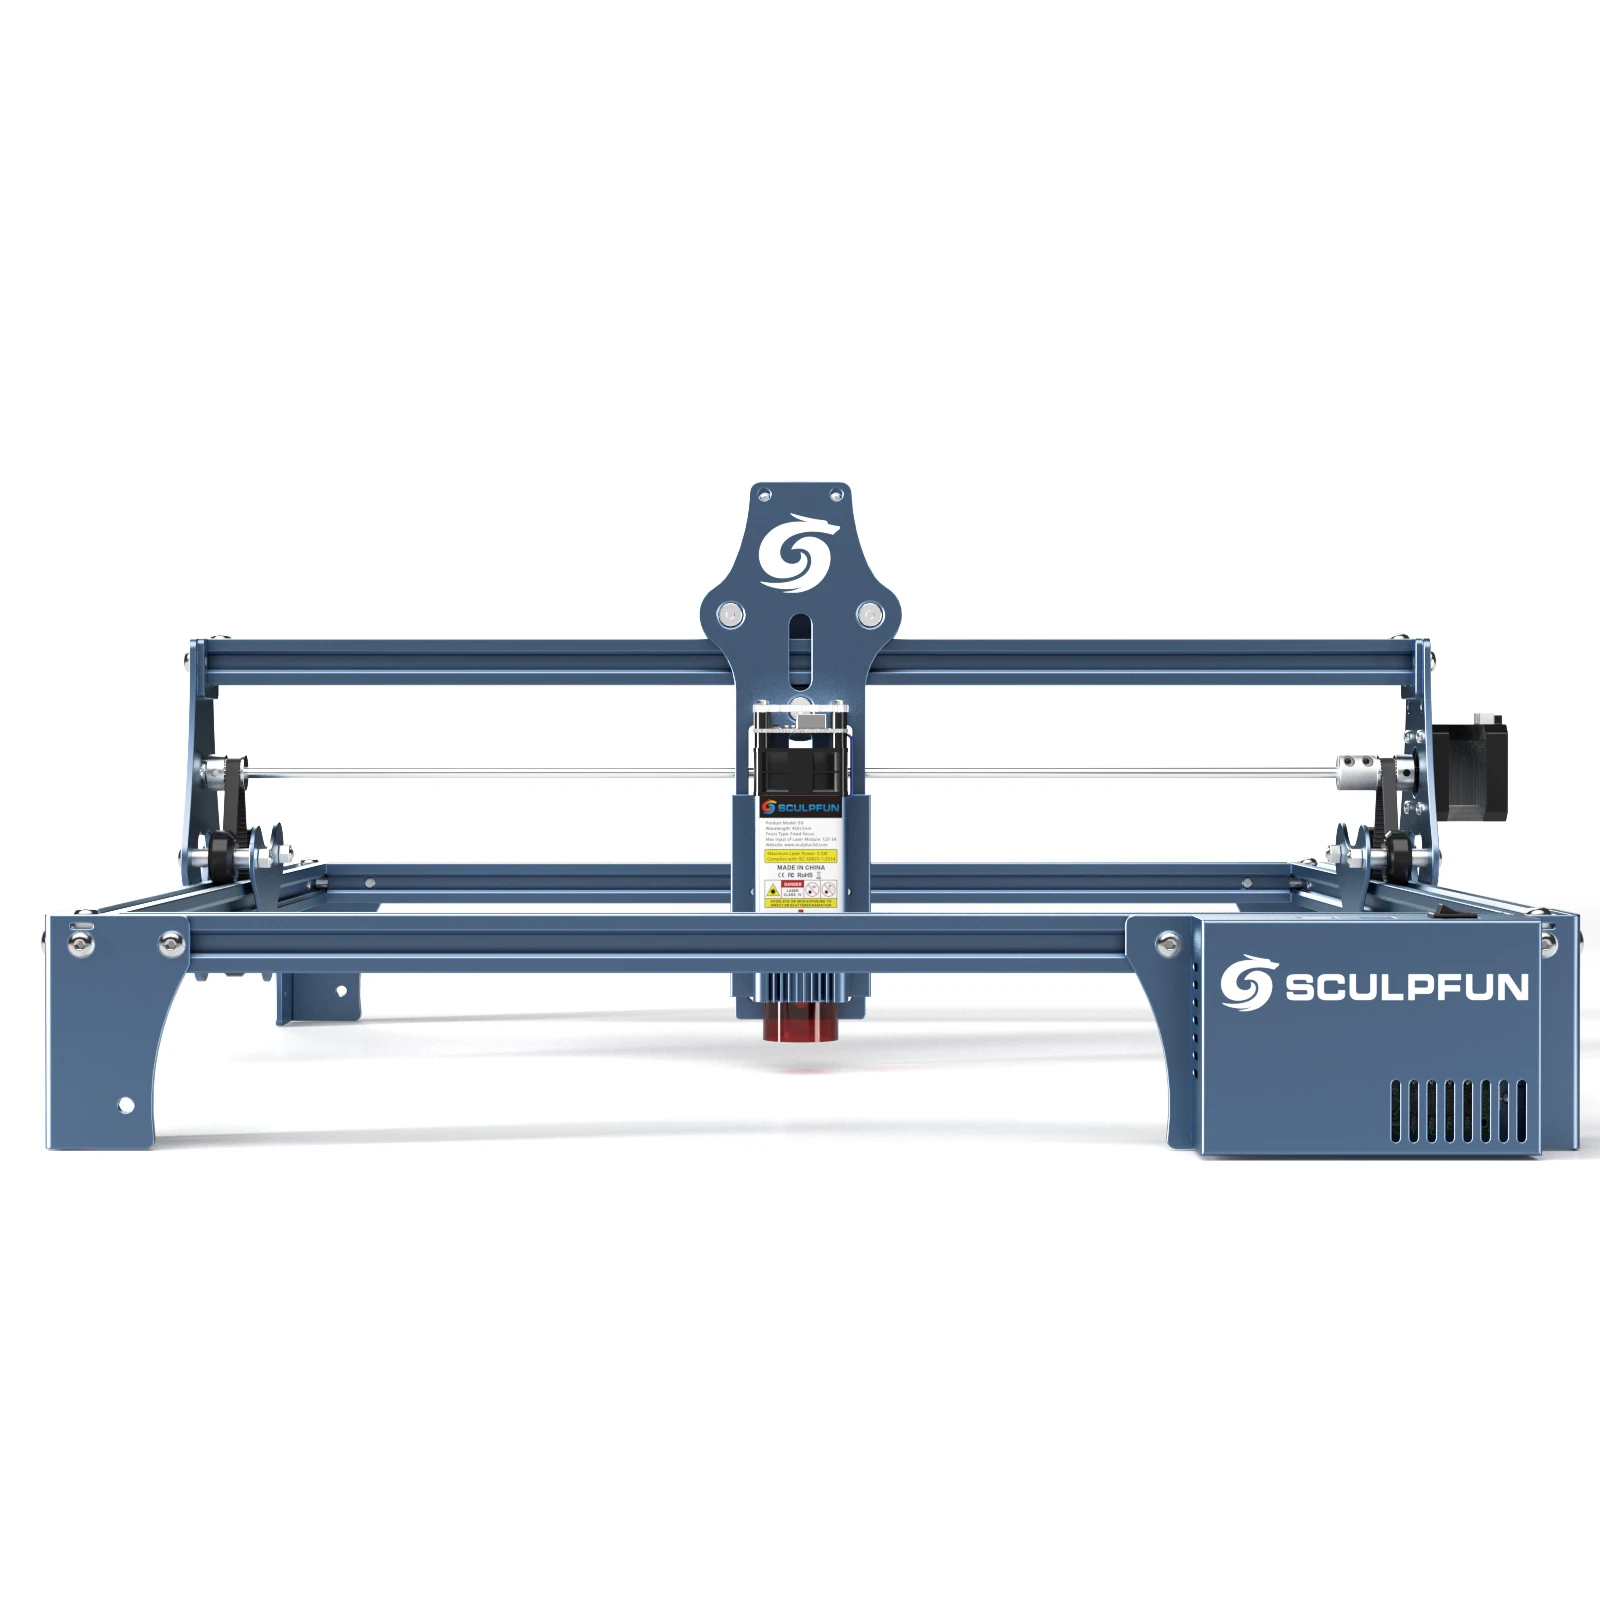 Sculpfun S9 90W CO2 Laser Engraver 5.5-6W Carpentry Laser Engraving Machine High-precision Diy Wood Router Cutting Tools 41*42cm enlarge